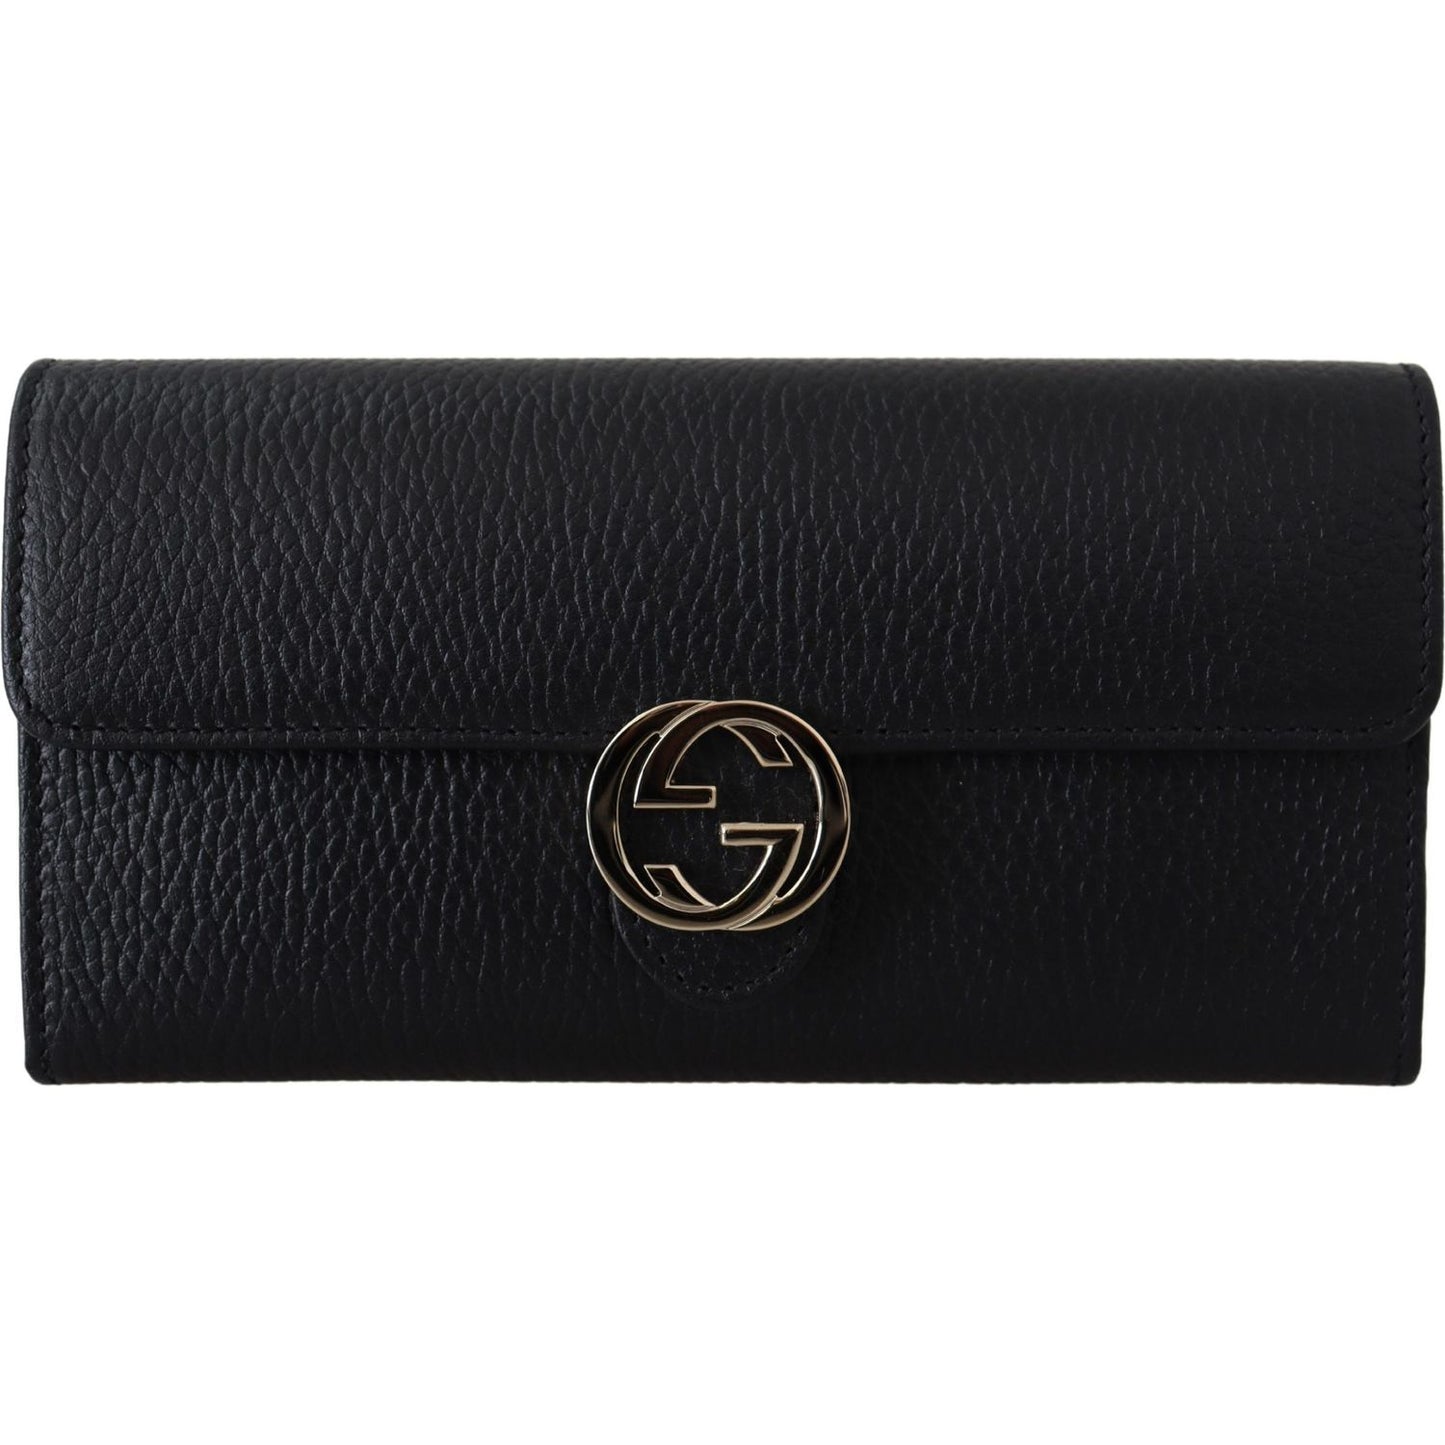 Gucci Elegant Black Leather Wallet with GG Snap Closure black-icon-leather-wallet IMG_6450-1-scaled-541b8ae7-b66.jpg